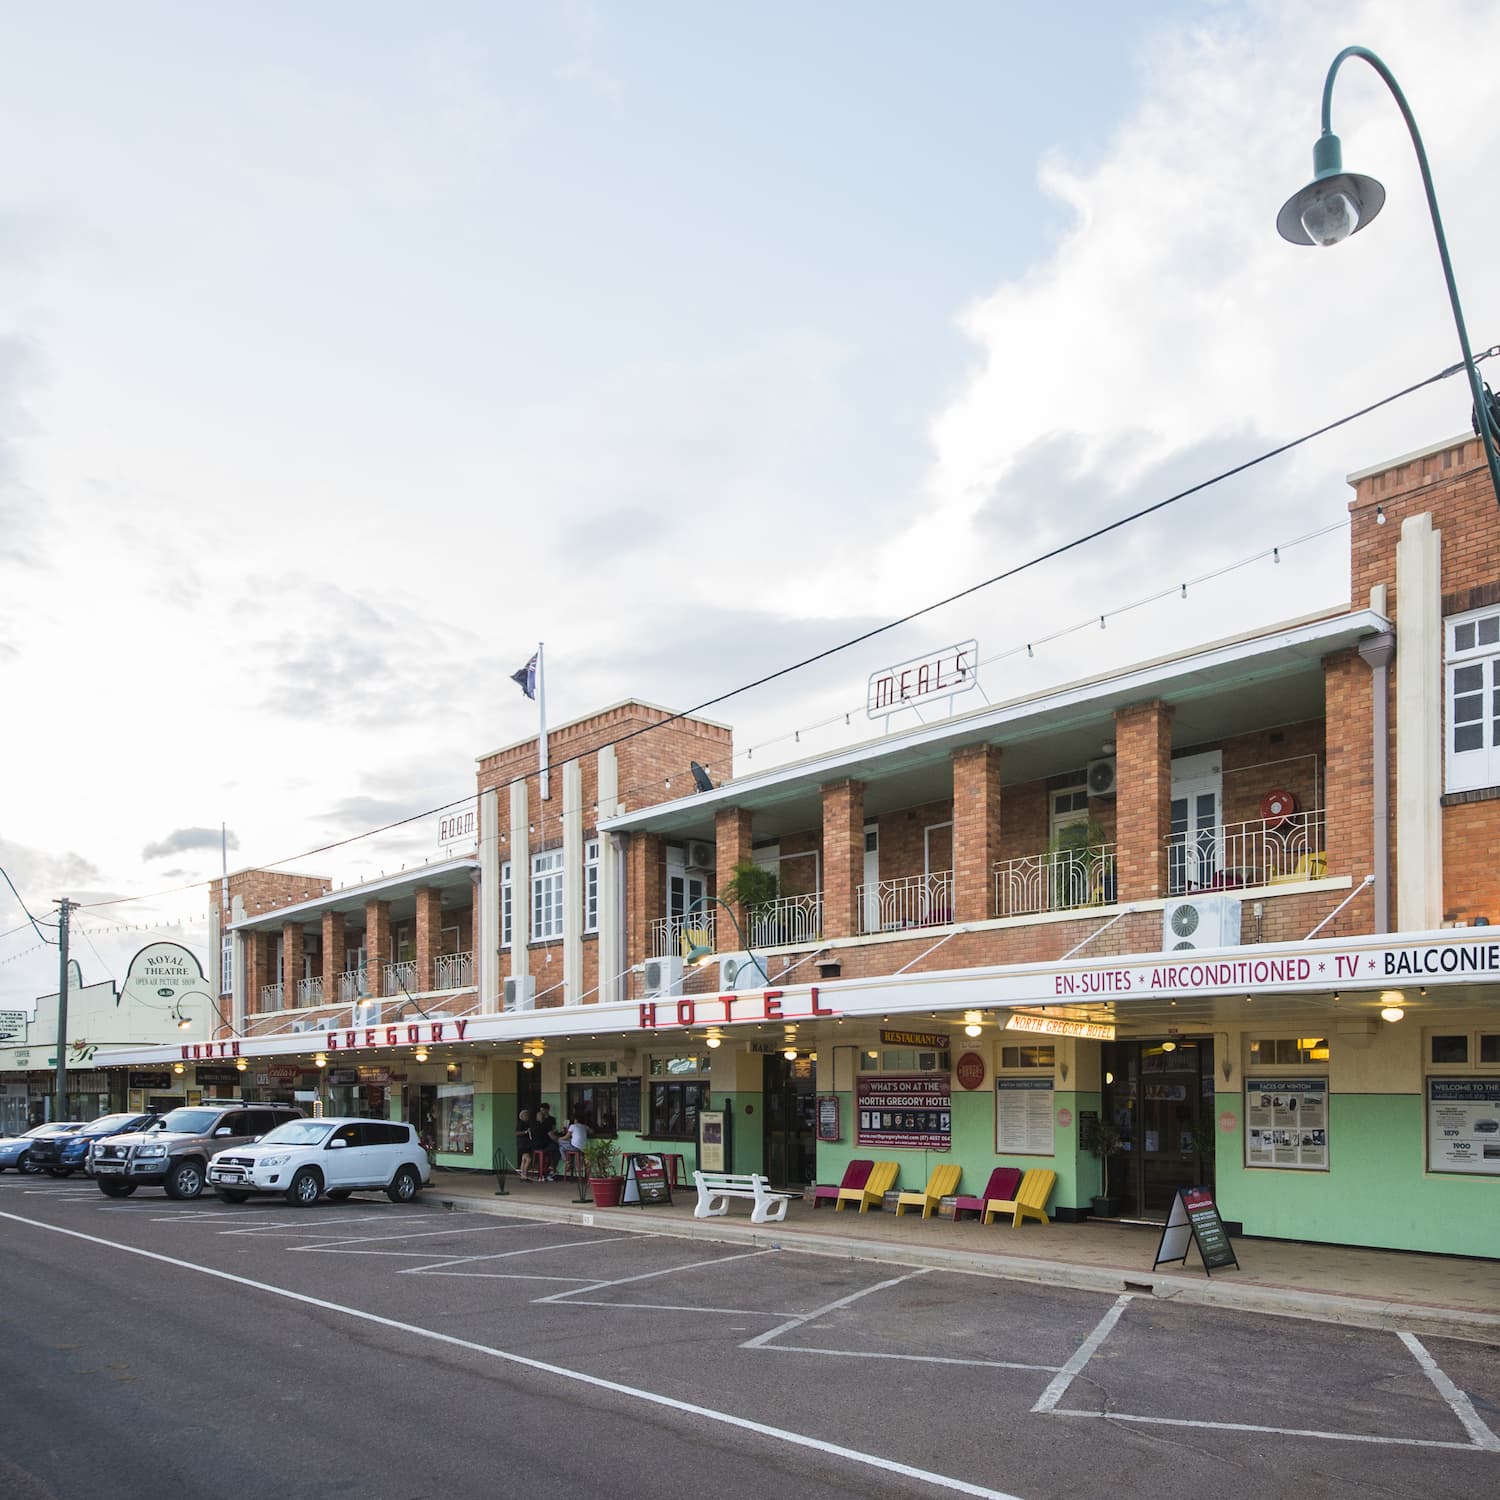 Street view of the North Gregory Hotel, Winton